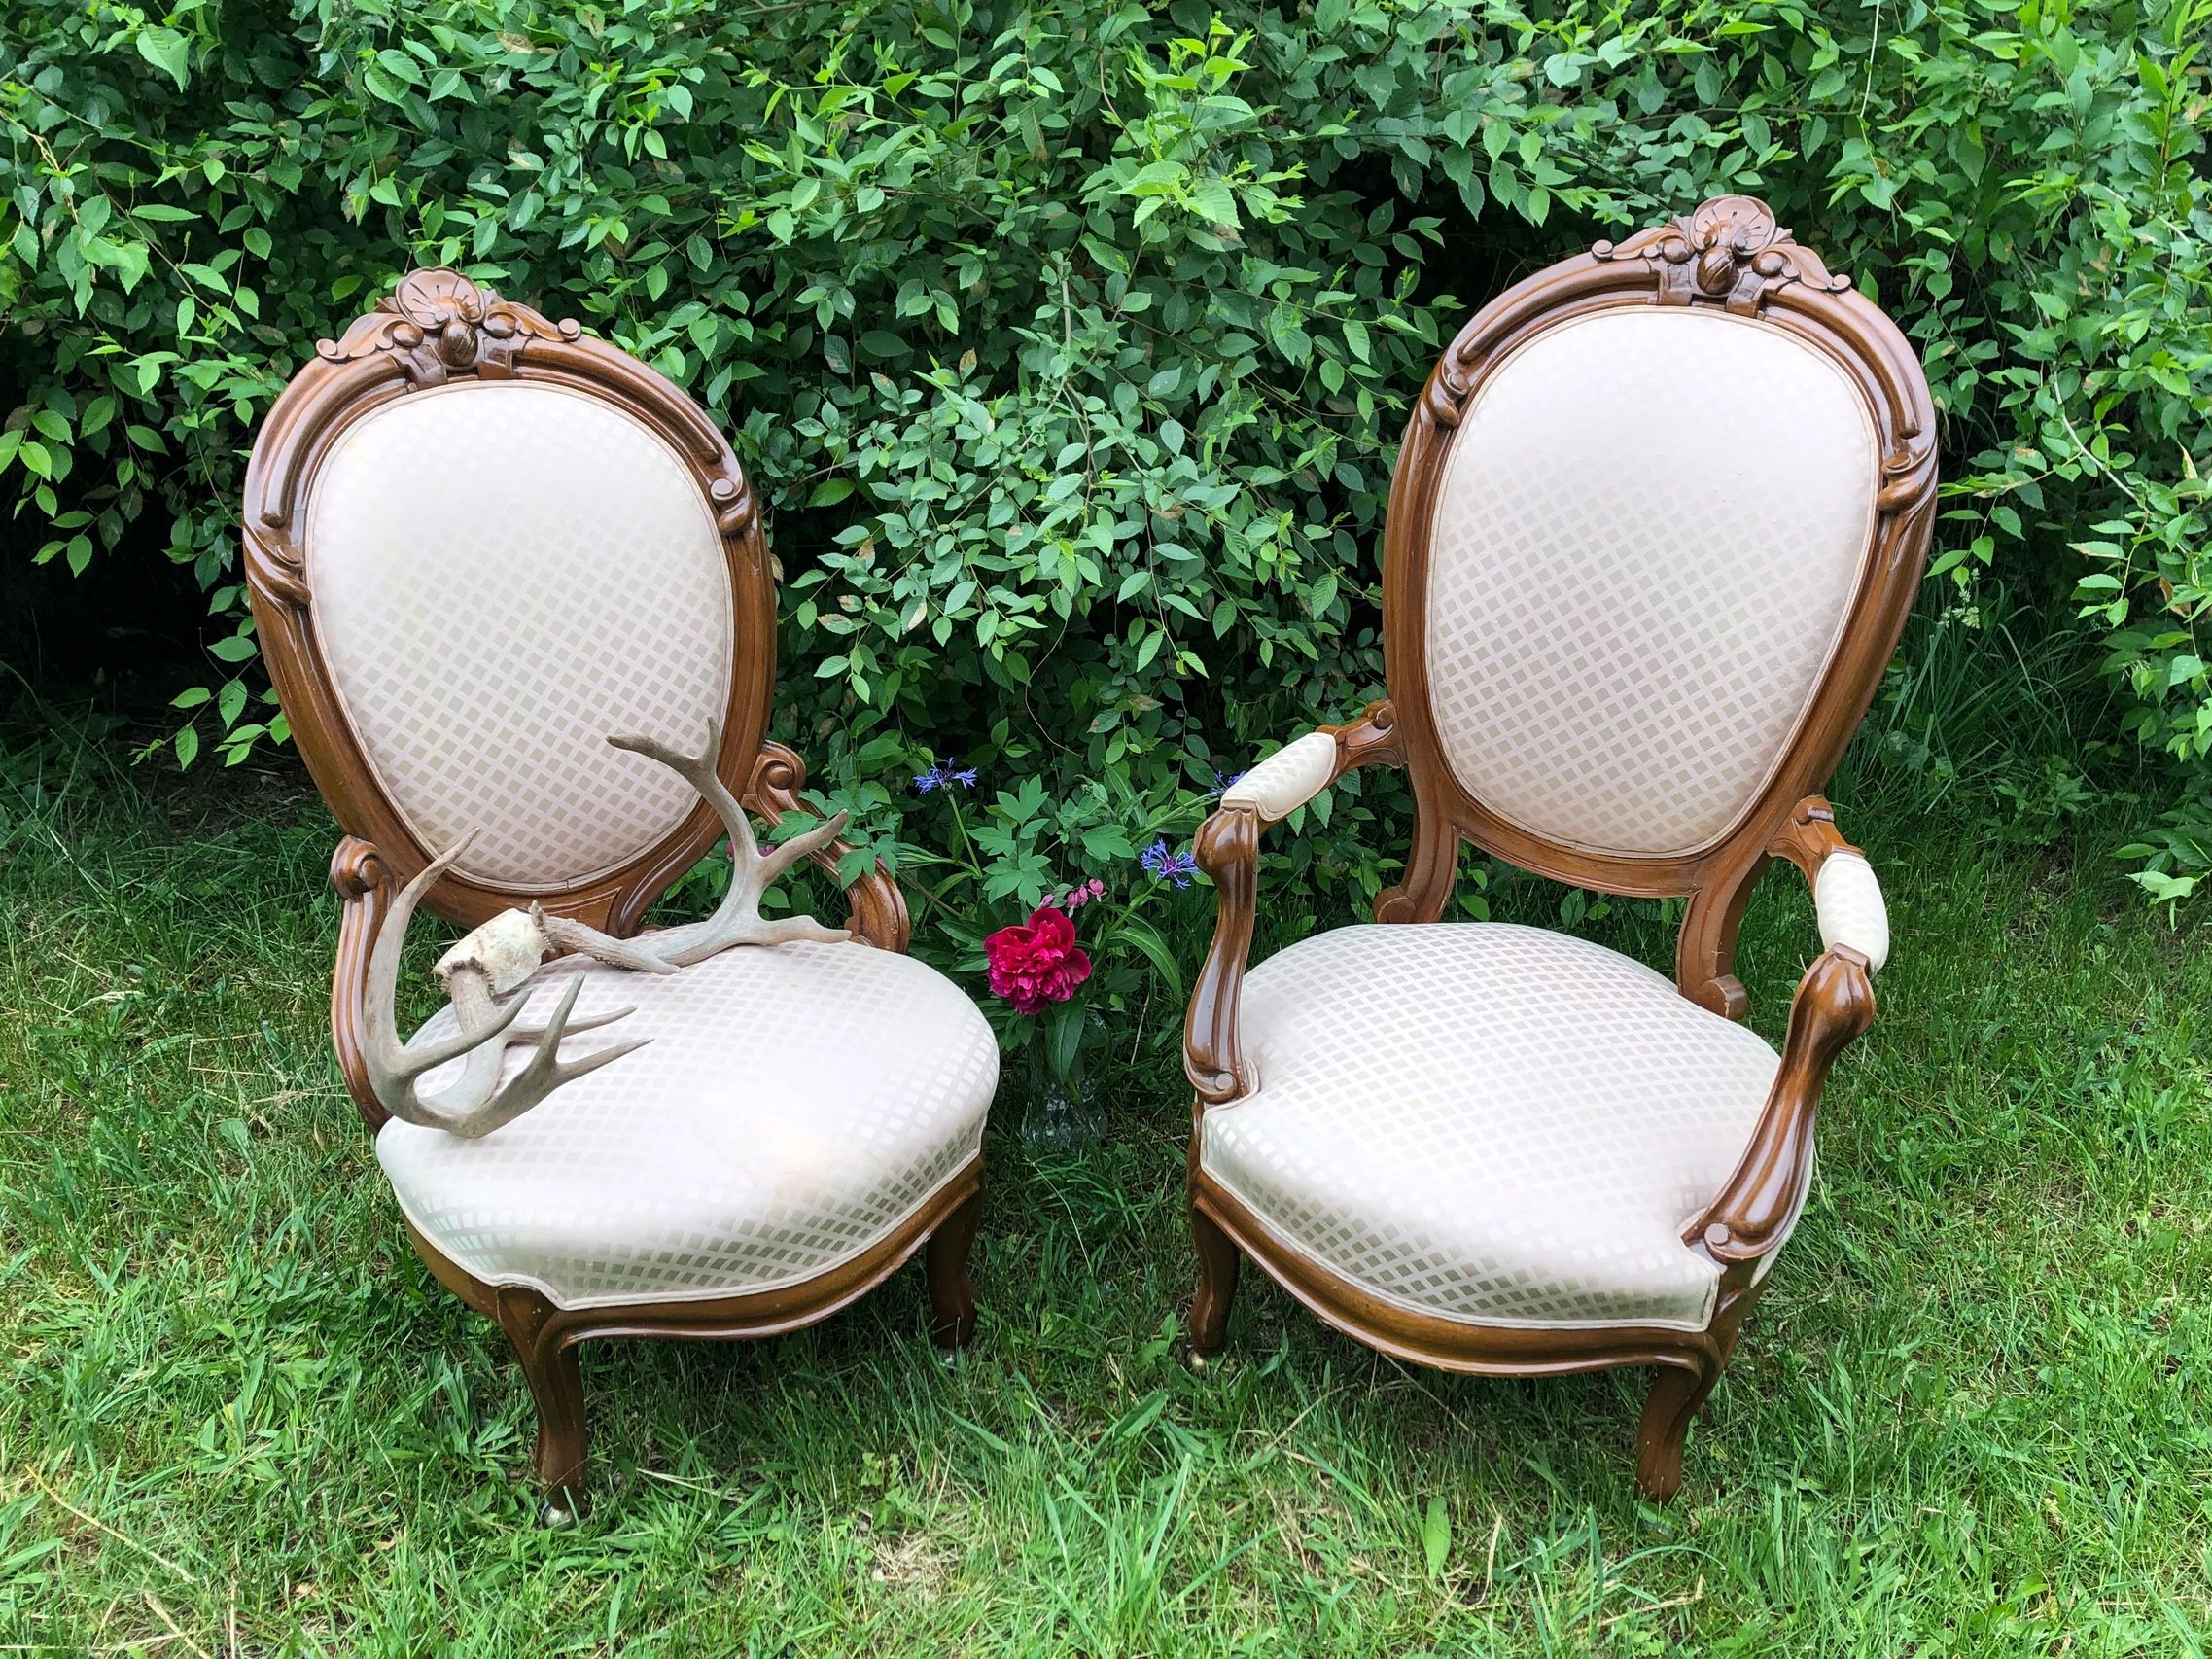 Rusticana Rentals - The Astorians (antique his and her chairs)